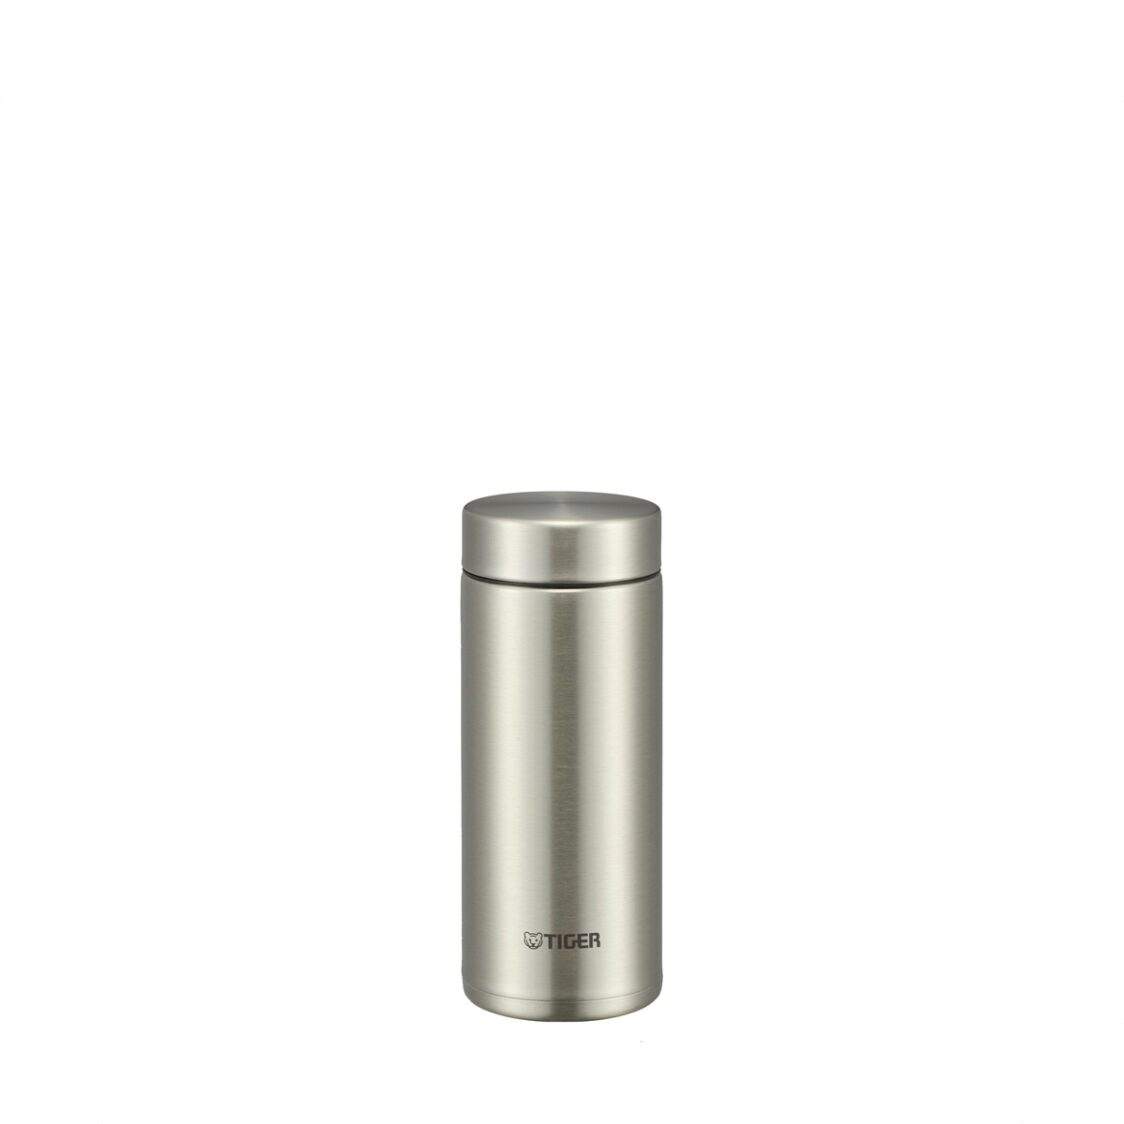 Tiger 350ml Double Stainless Steel Bottle - Clear Stainless MMZ-A351 XC